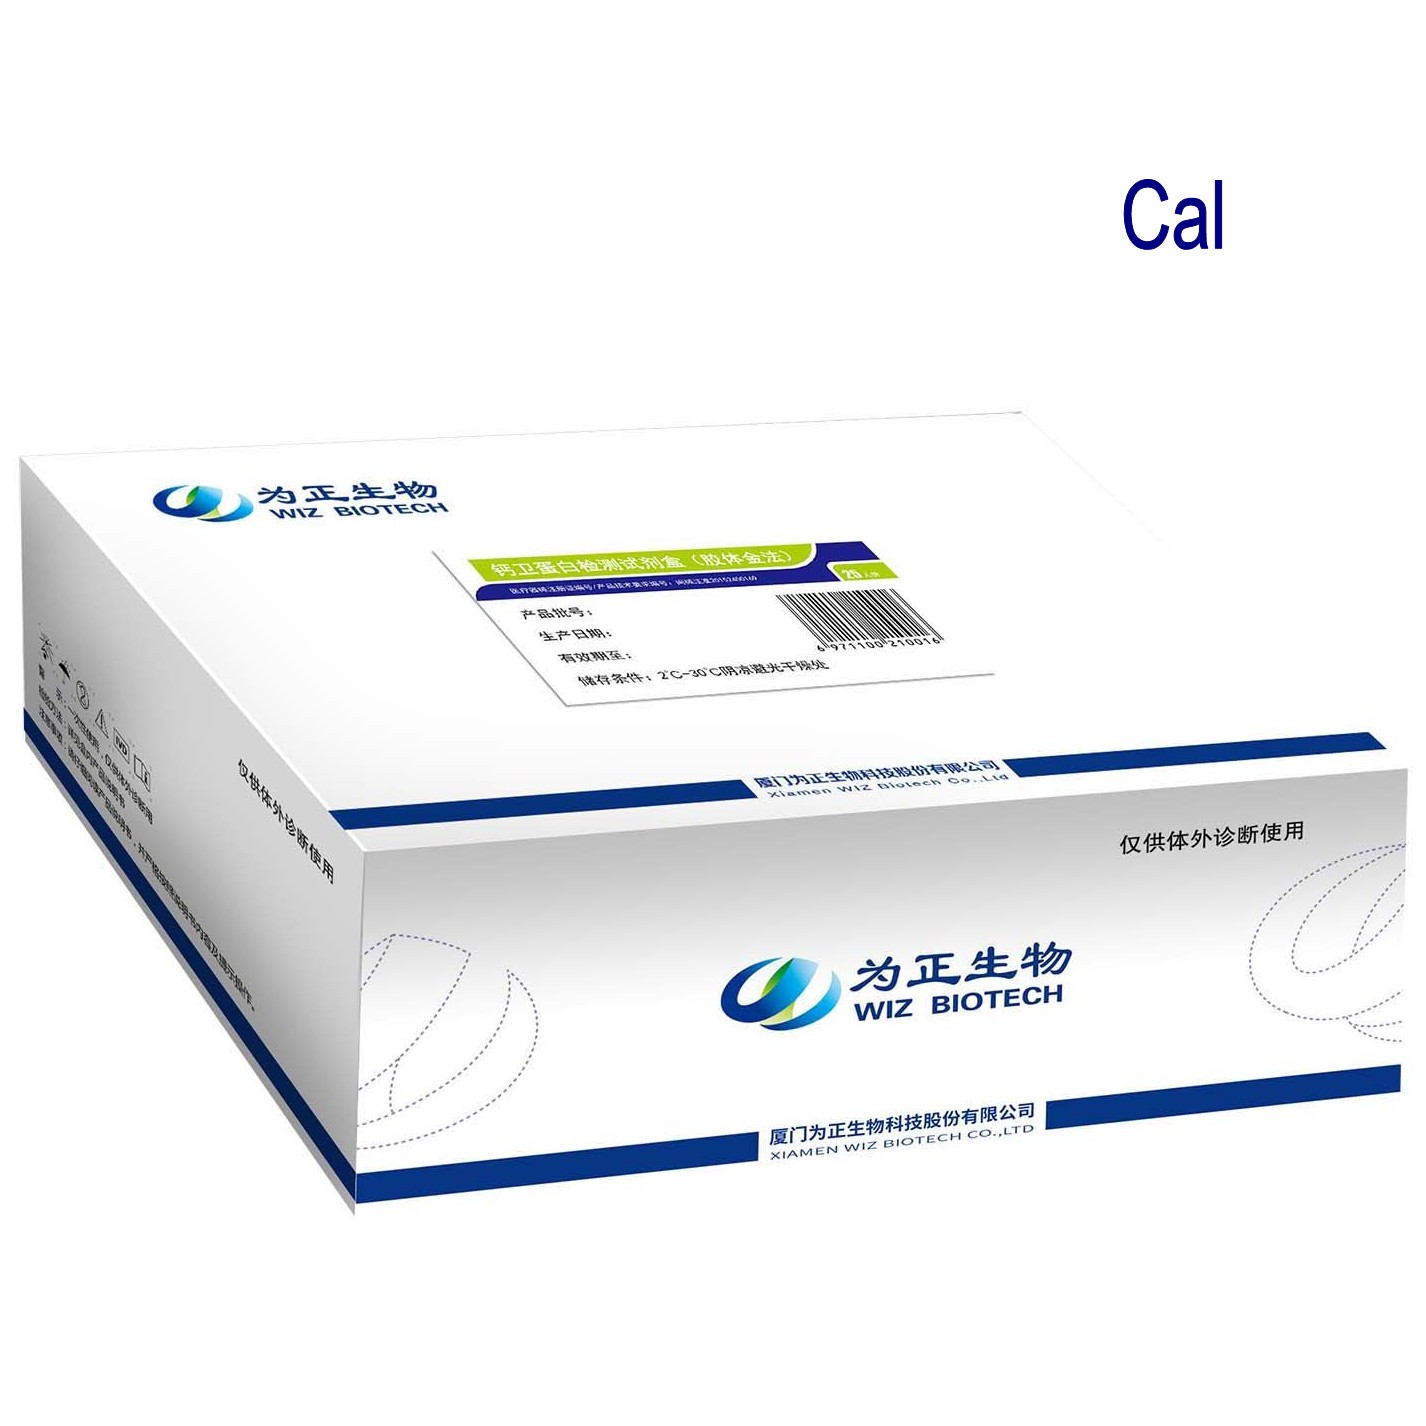 Competitive Price for T4 Elisa Kit - Diagnostic Kit for Calprotectin (Fluorescence Immunochromatographic Assay) – Baysen